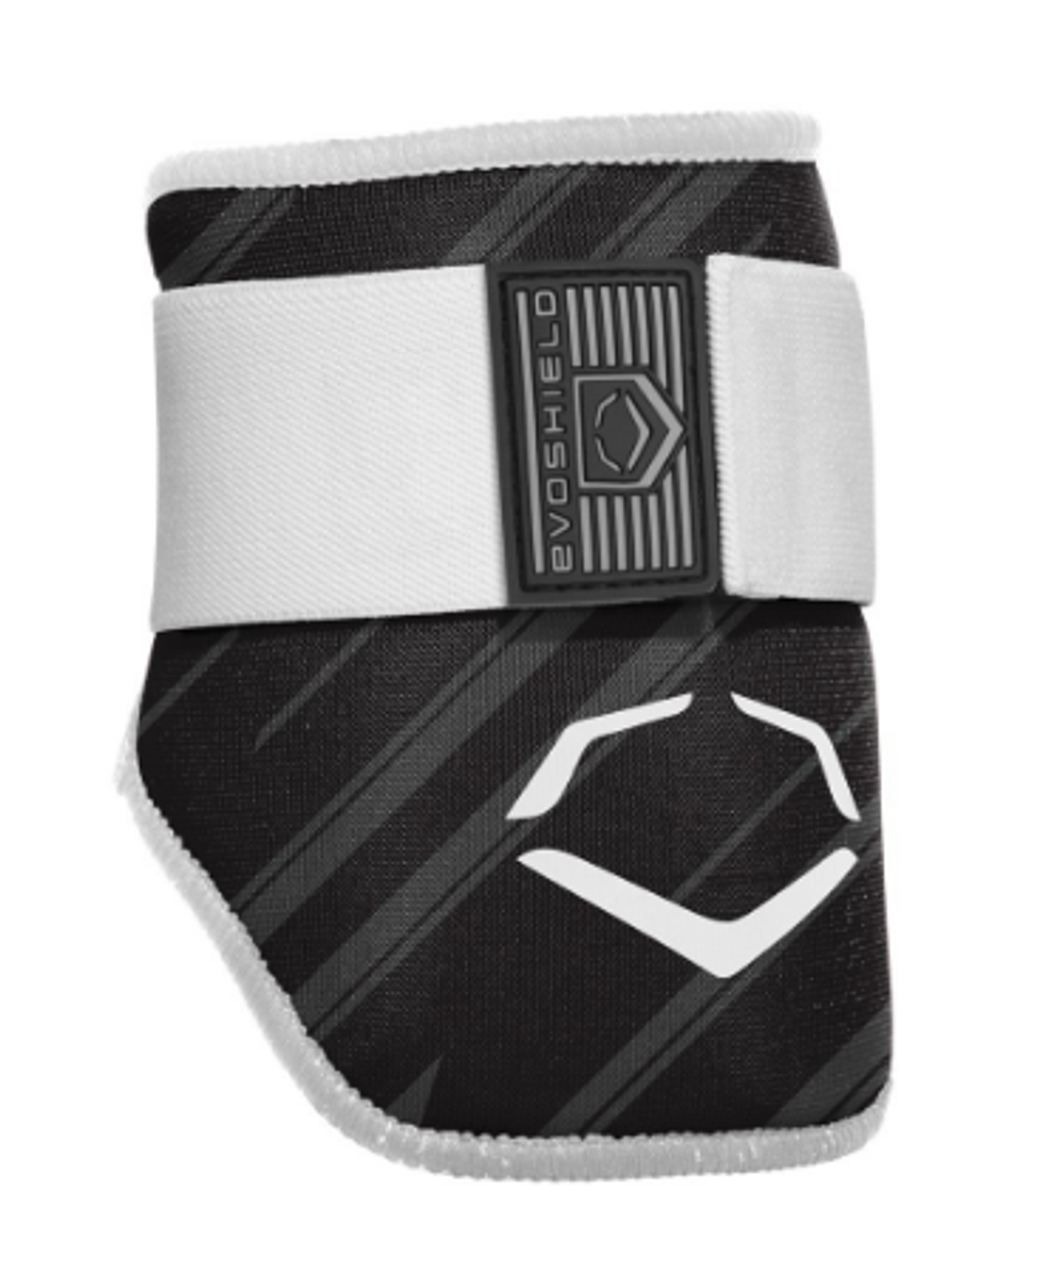 FRANKLIN PROTECTIVE ELBOW SHIELD YOUTH 23403 